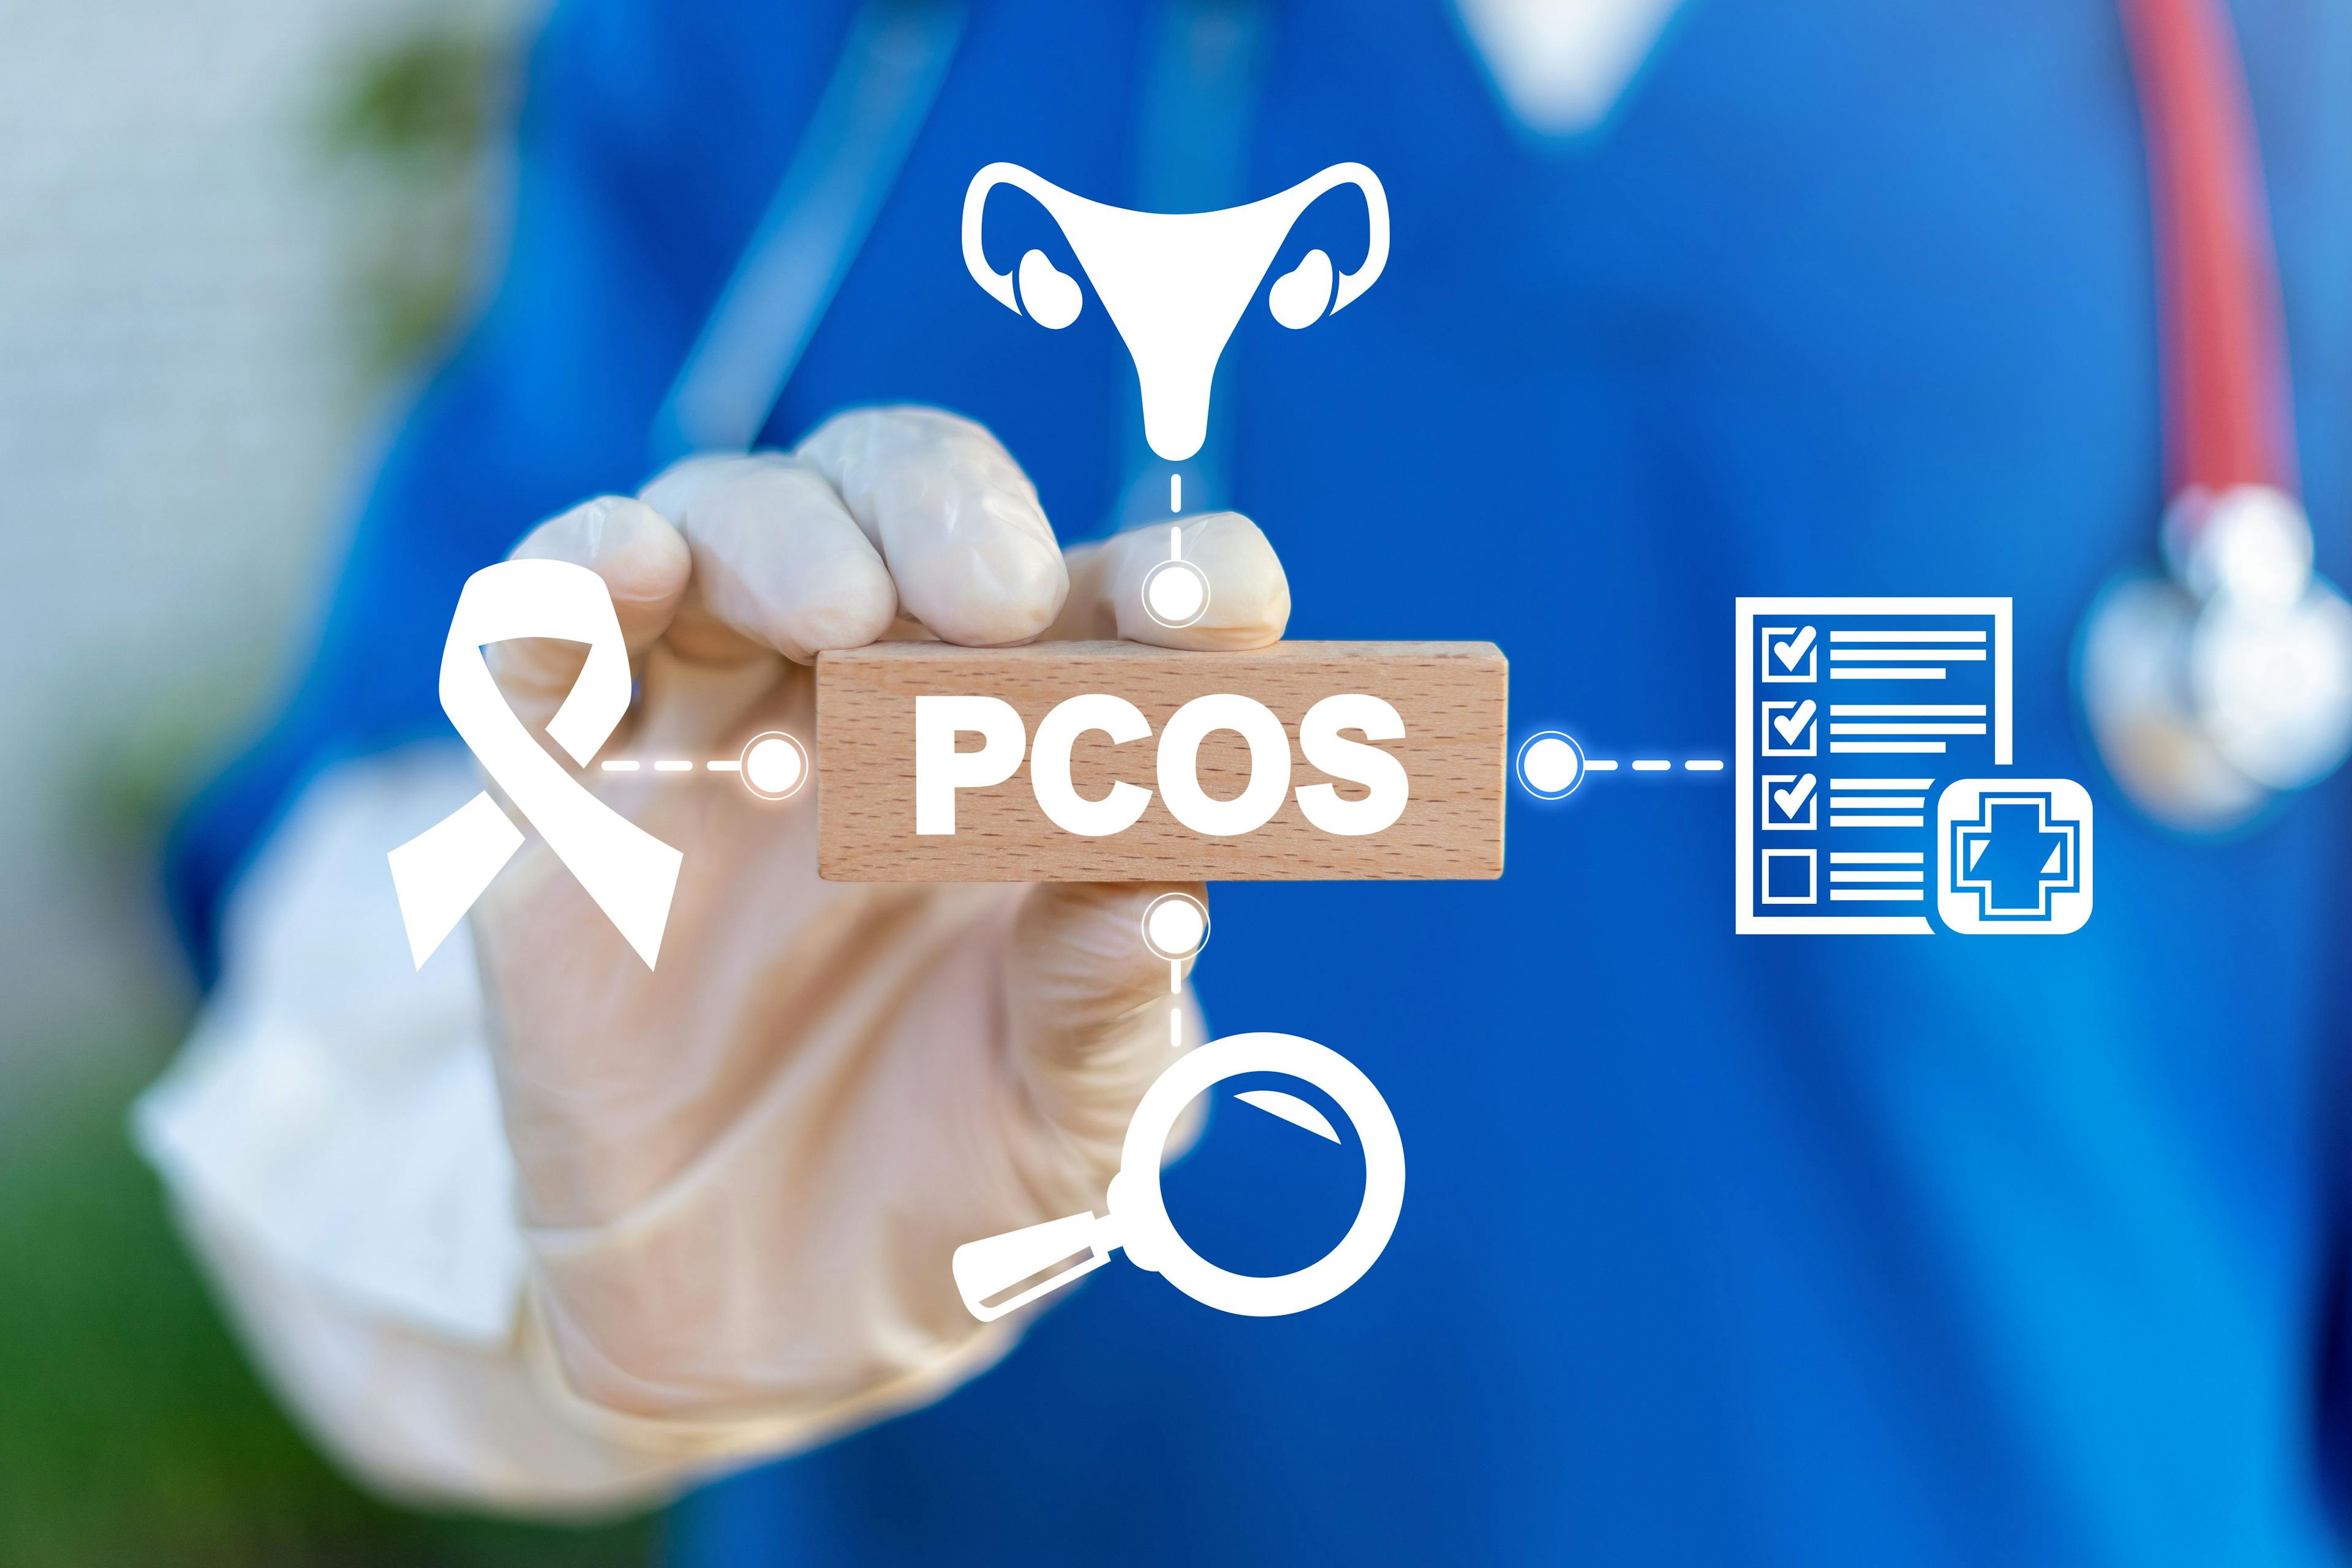 Women with PCOS may be at higher risk for CVD